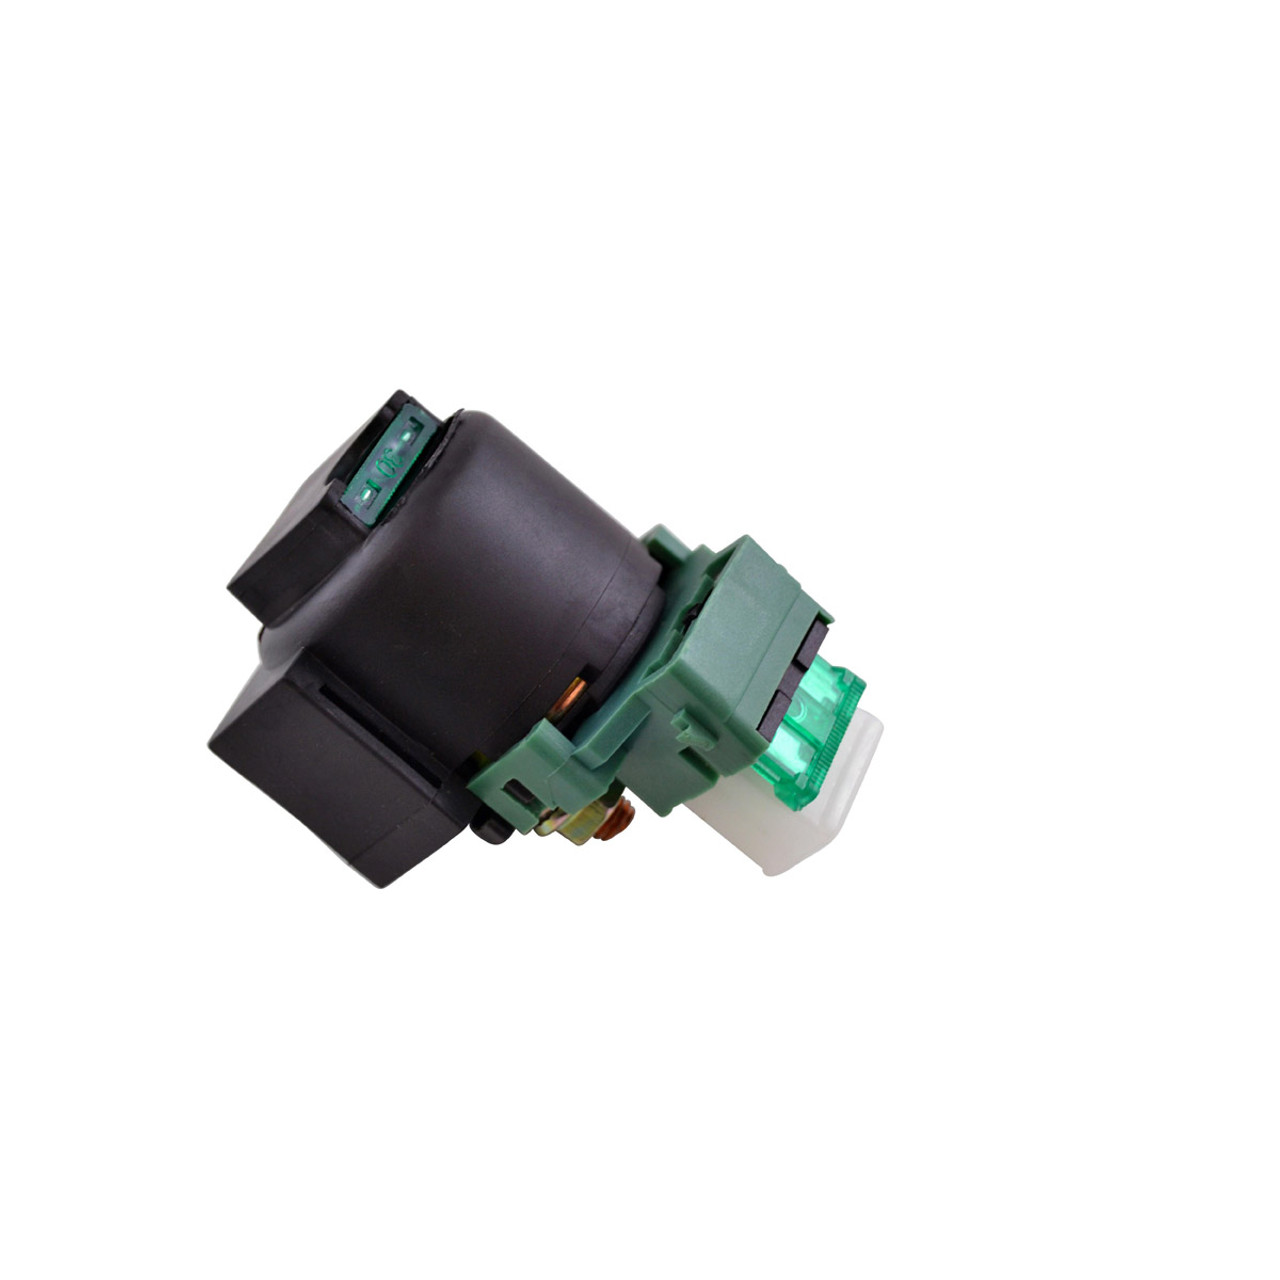 RMSTATOR New Aftermarket Universal Universal Starter Relay Solenoid Switch with Multiple Connectors ( UTV ATV Motorcycle Watercraft ), RM09018